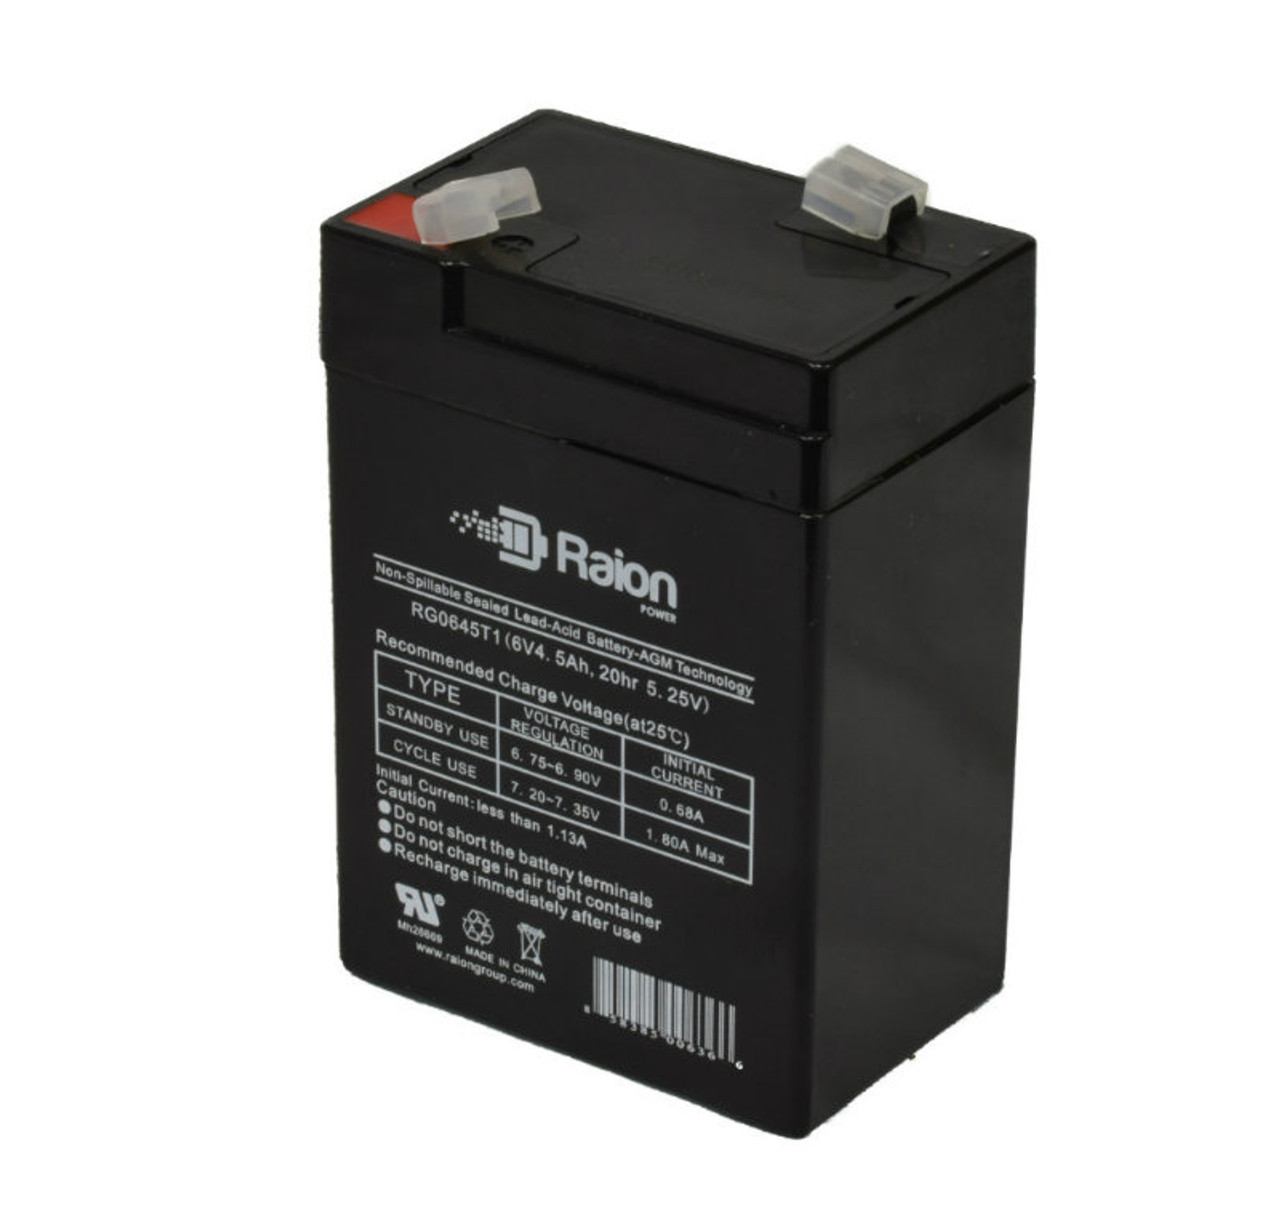 Raion Power RG0645T1 6V 4.5Ah Replacement Battery Cartridge for Palma PM5A-6